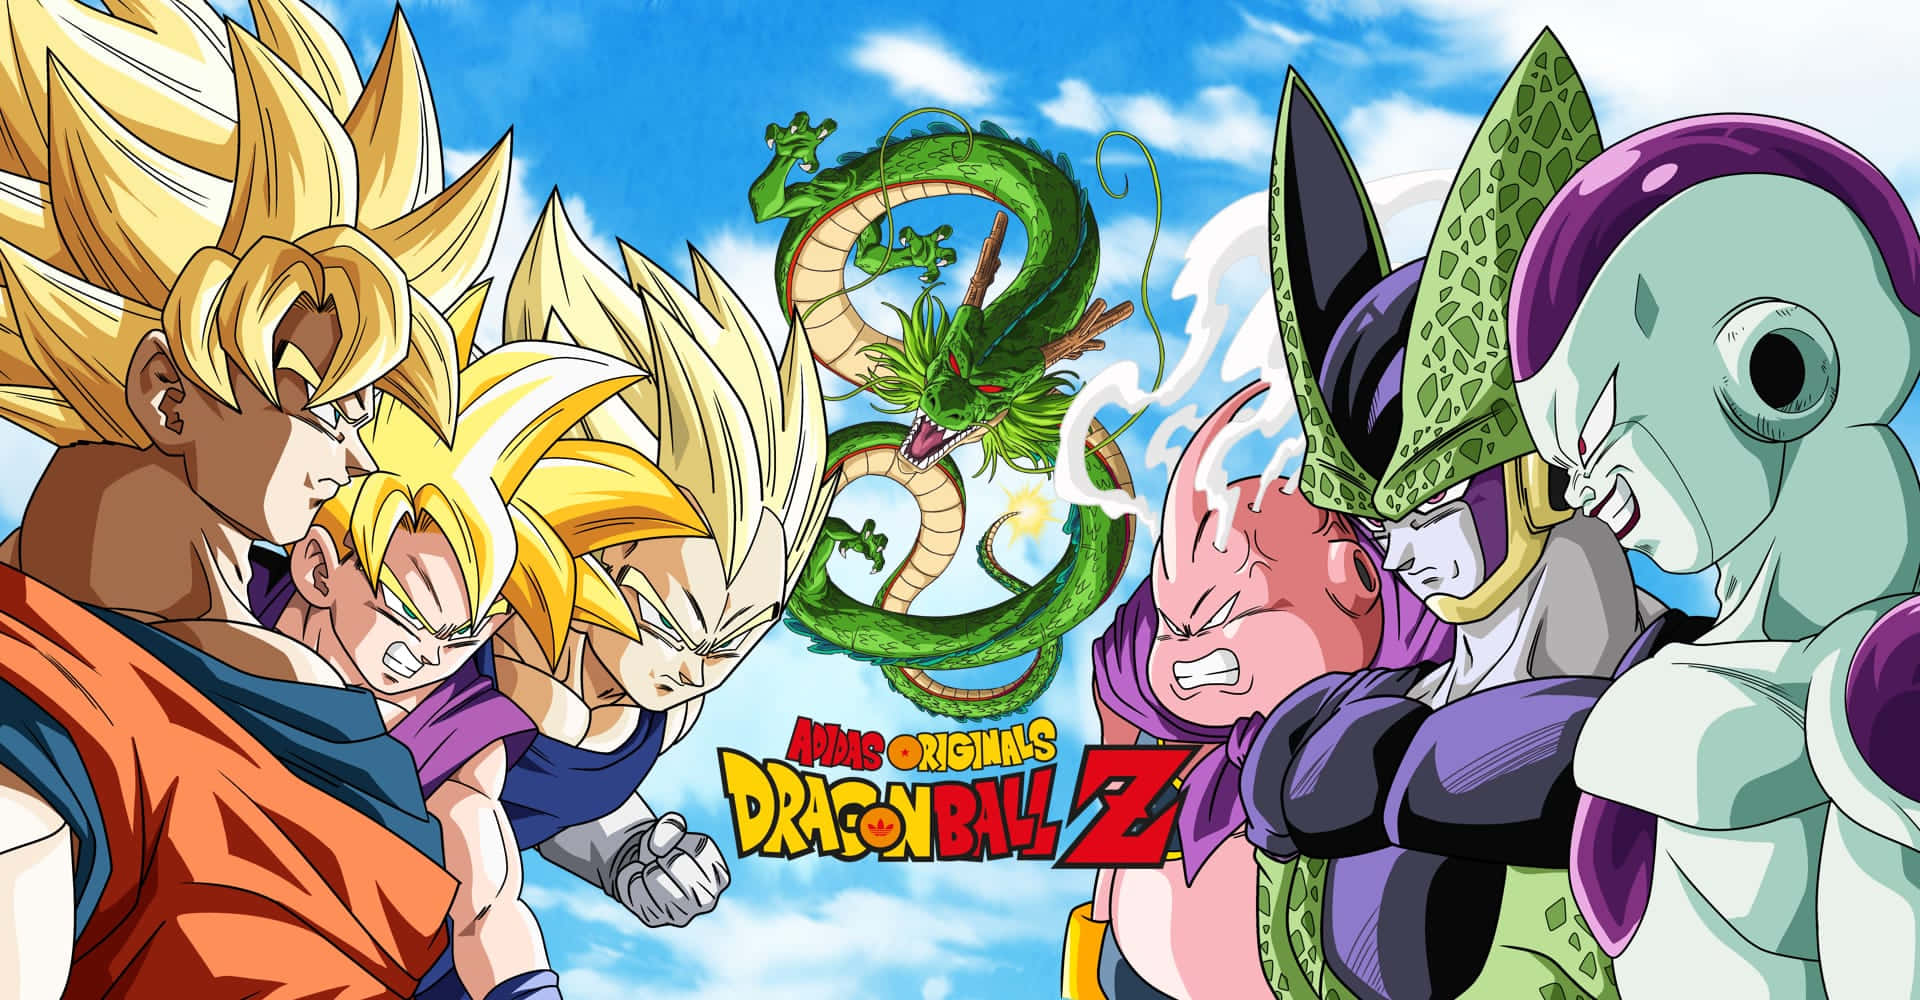 Heroes Villains Dragonball Z Pictures